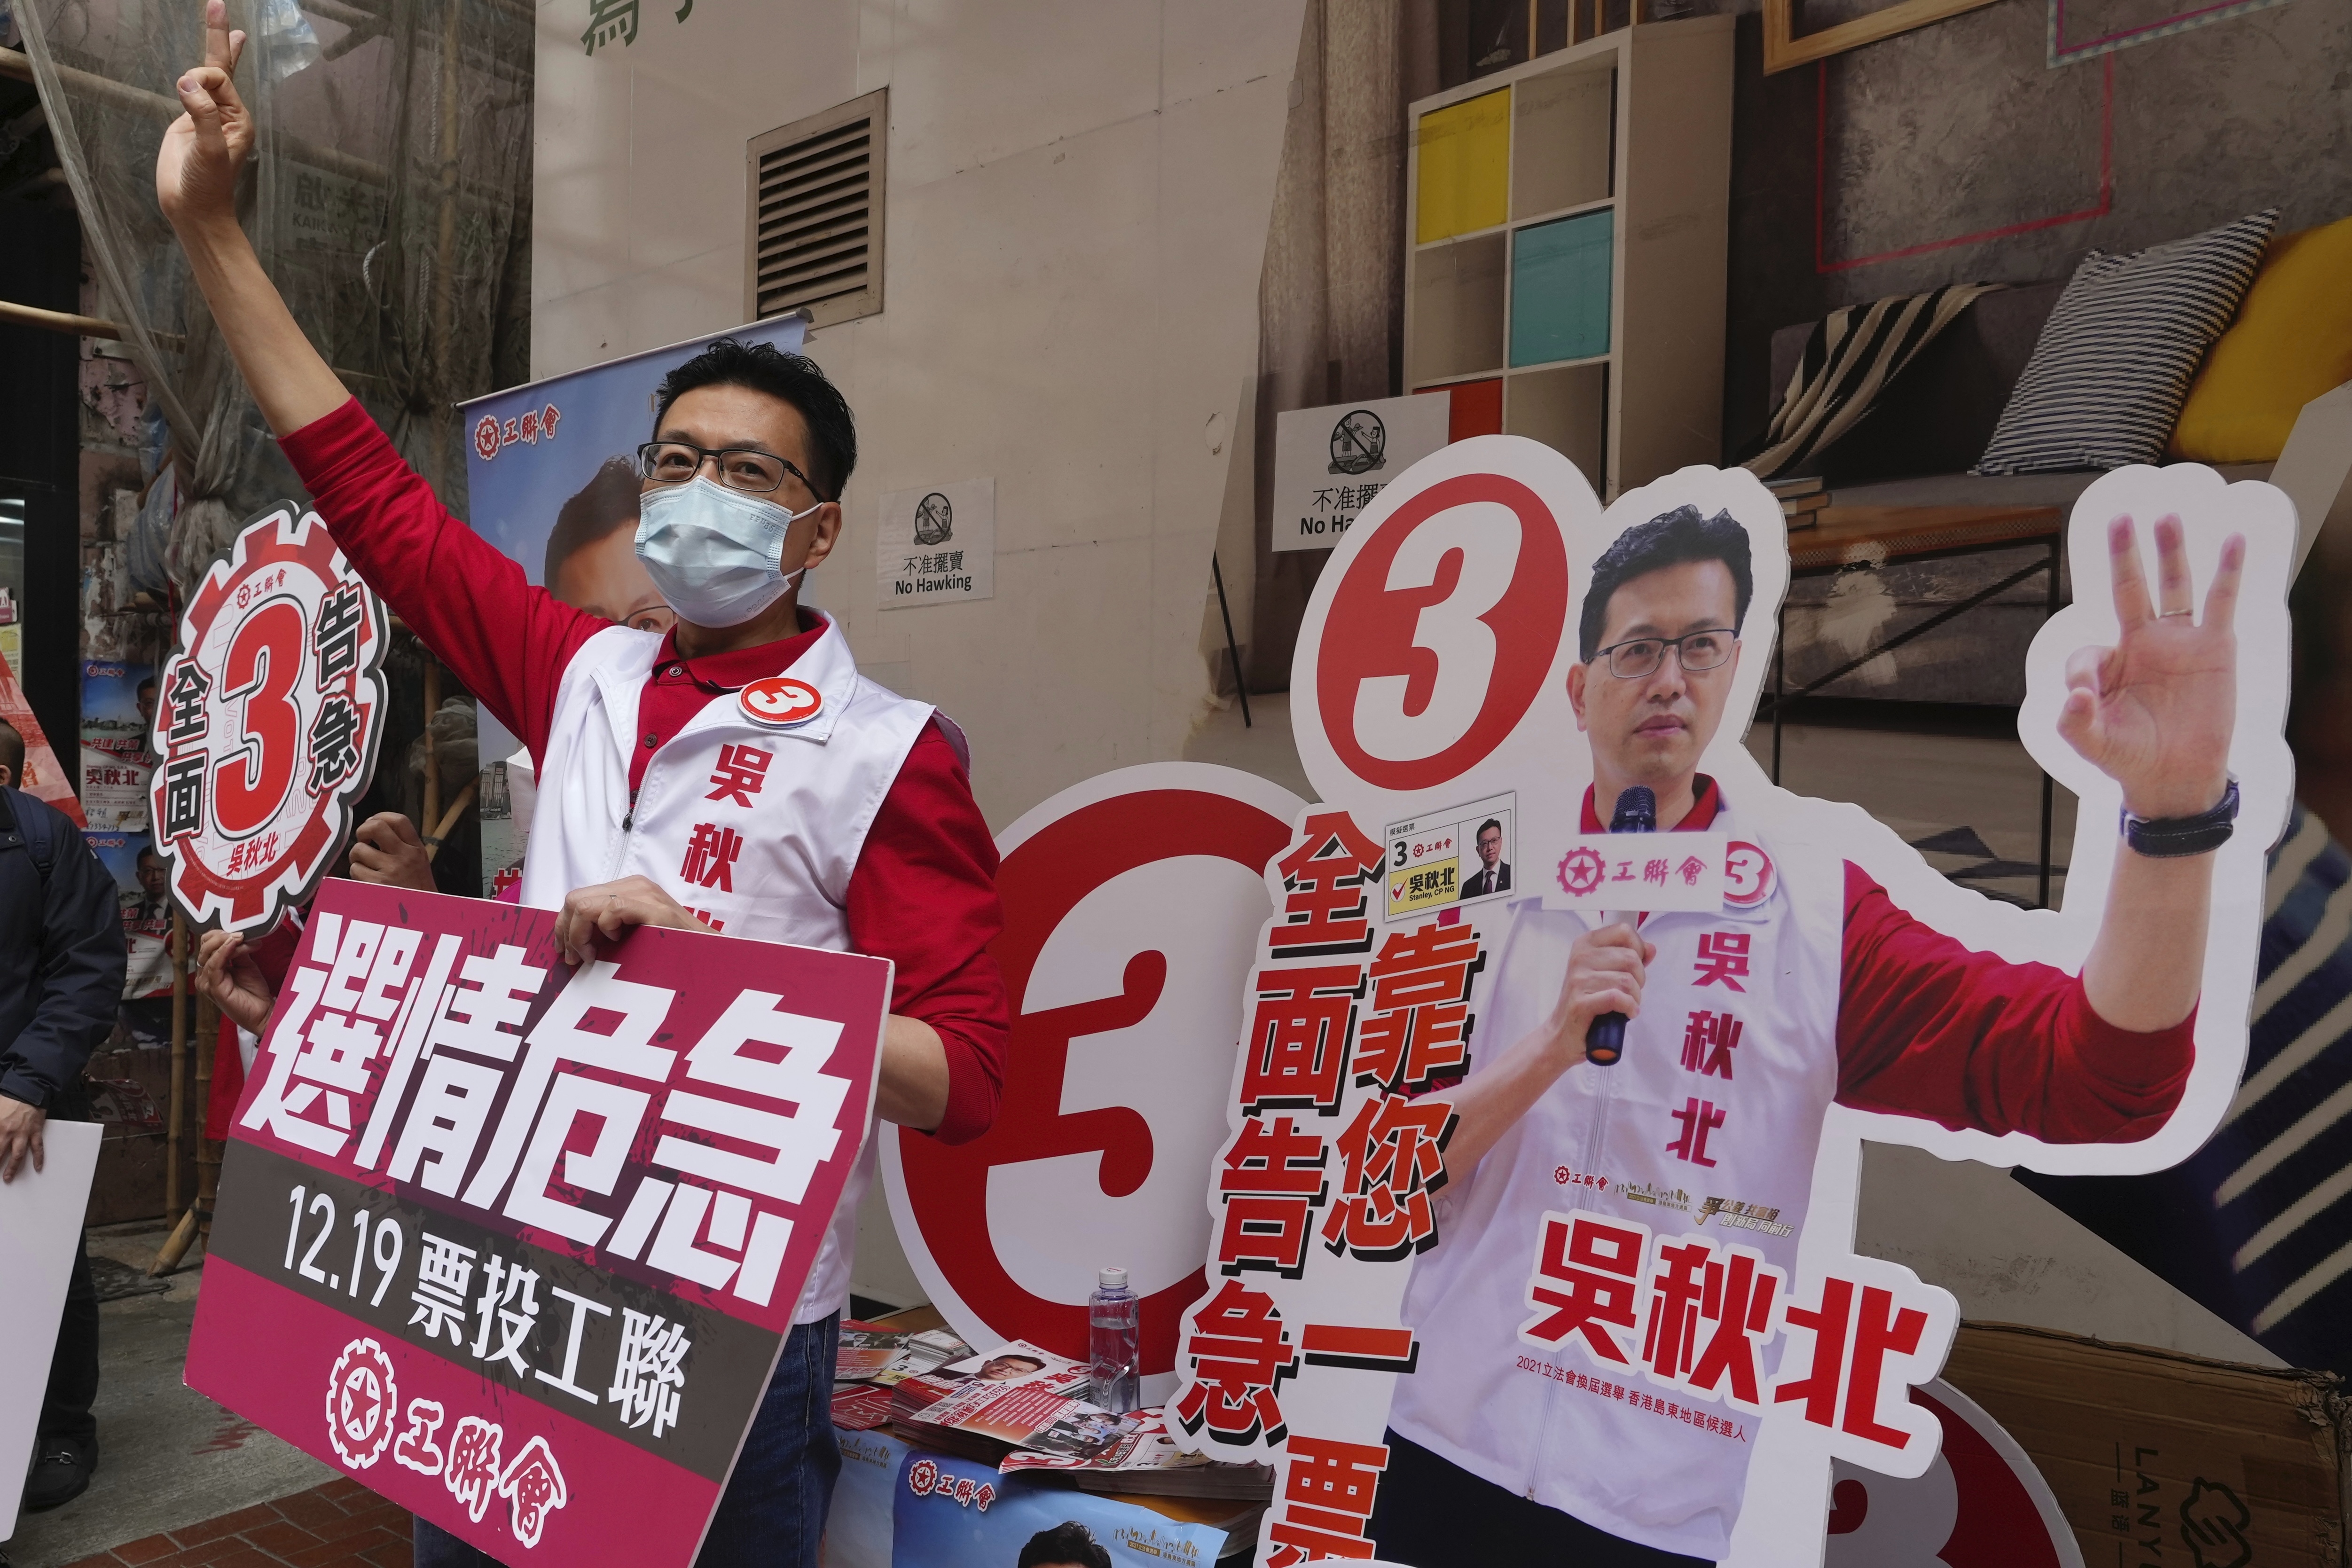 Pro-Beijing candidate Ng Chau-pei waves to supporters